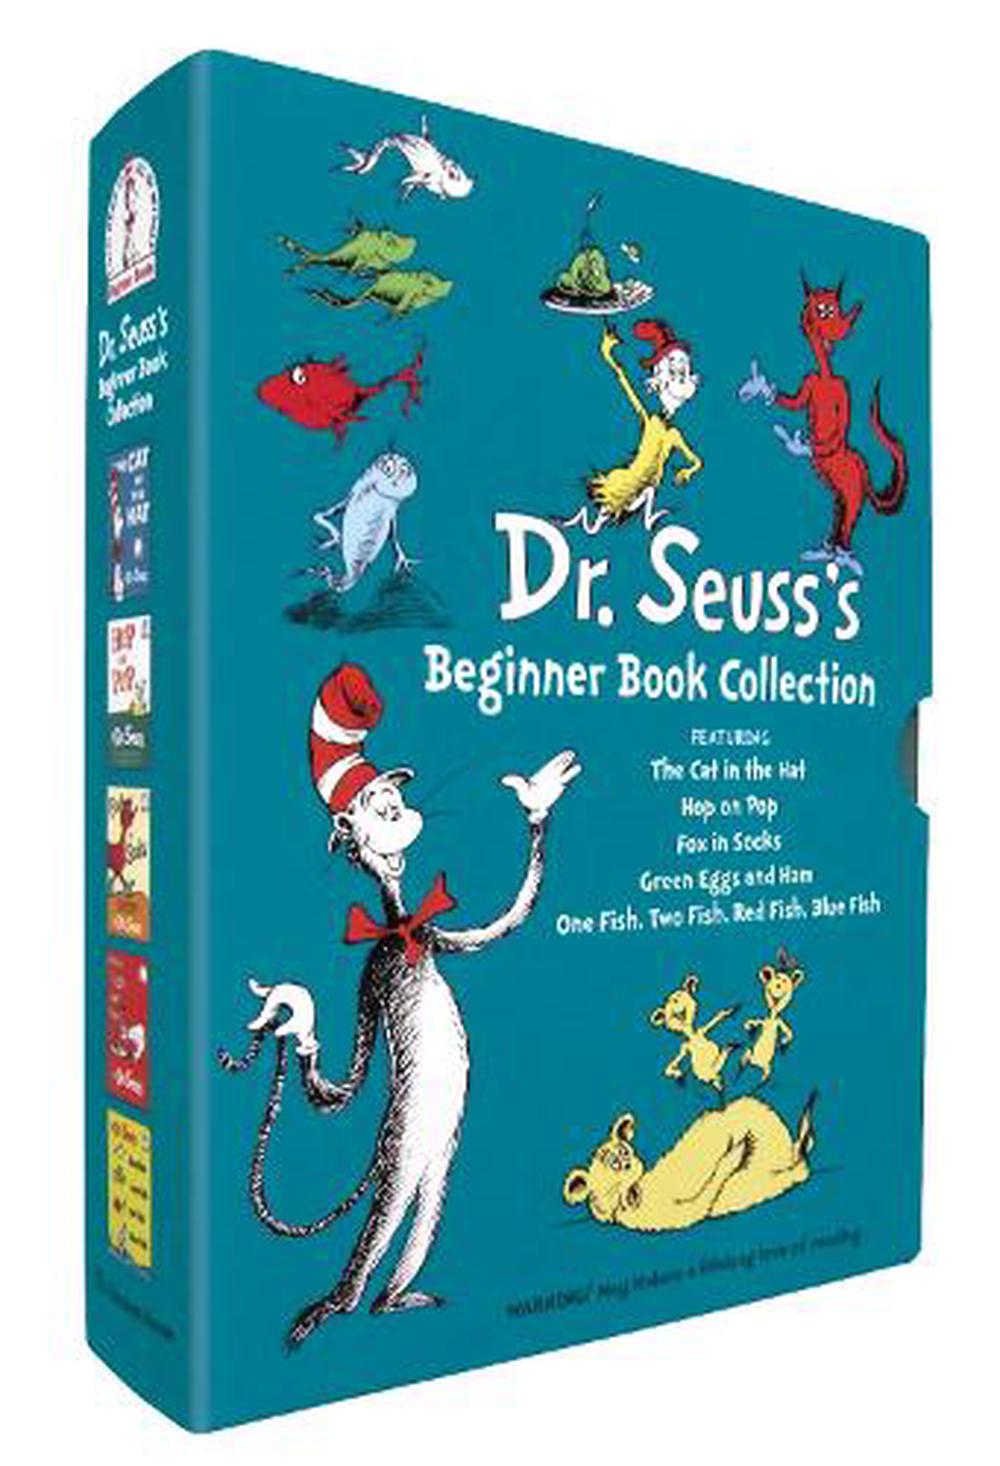 Dr. Seuss's Beginner Book Boxed Set Collection by Dr. Seuss, Hardcover ...